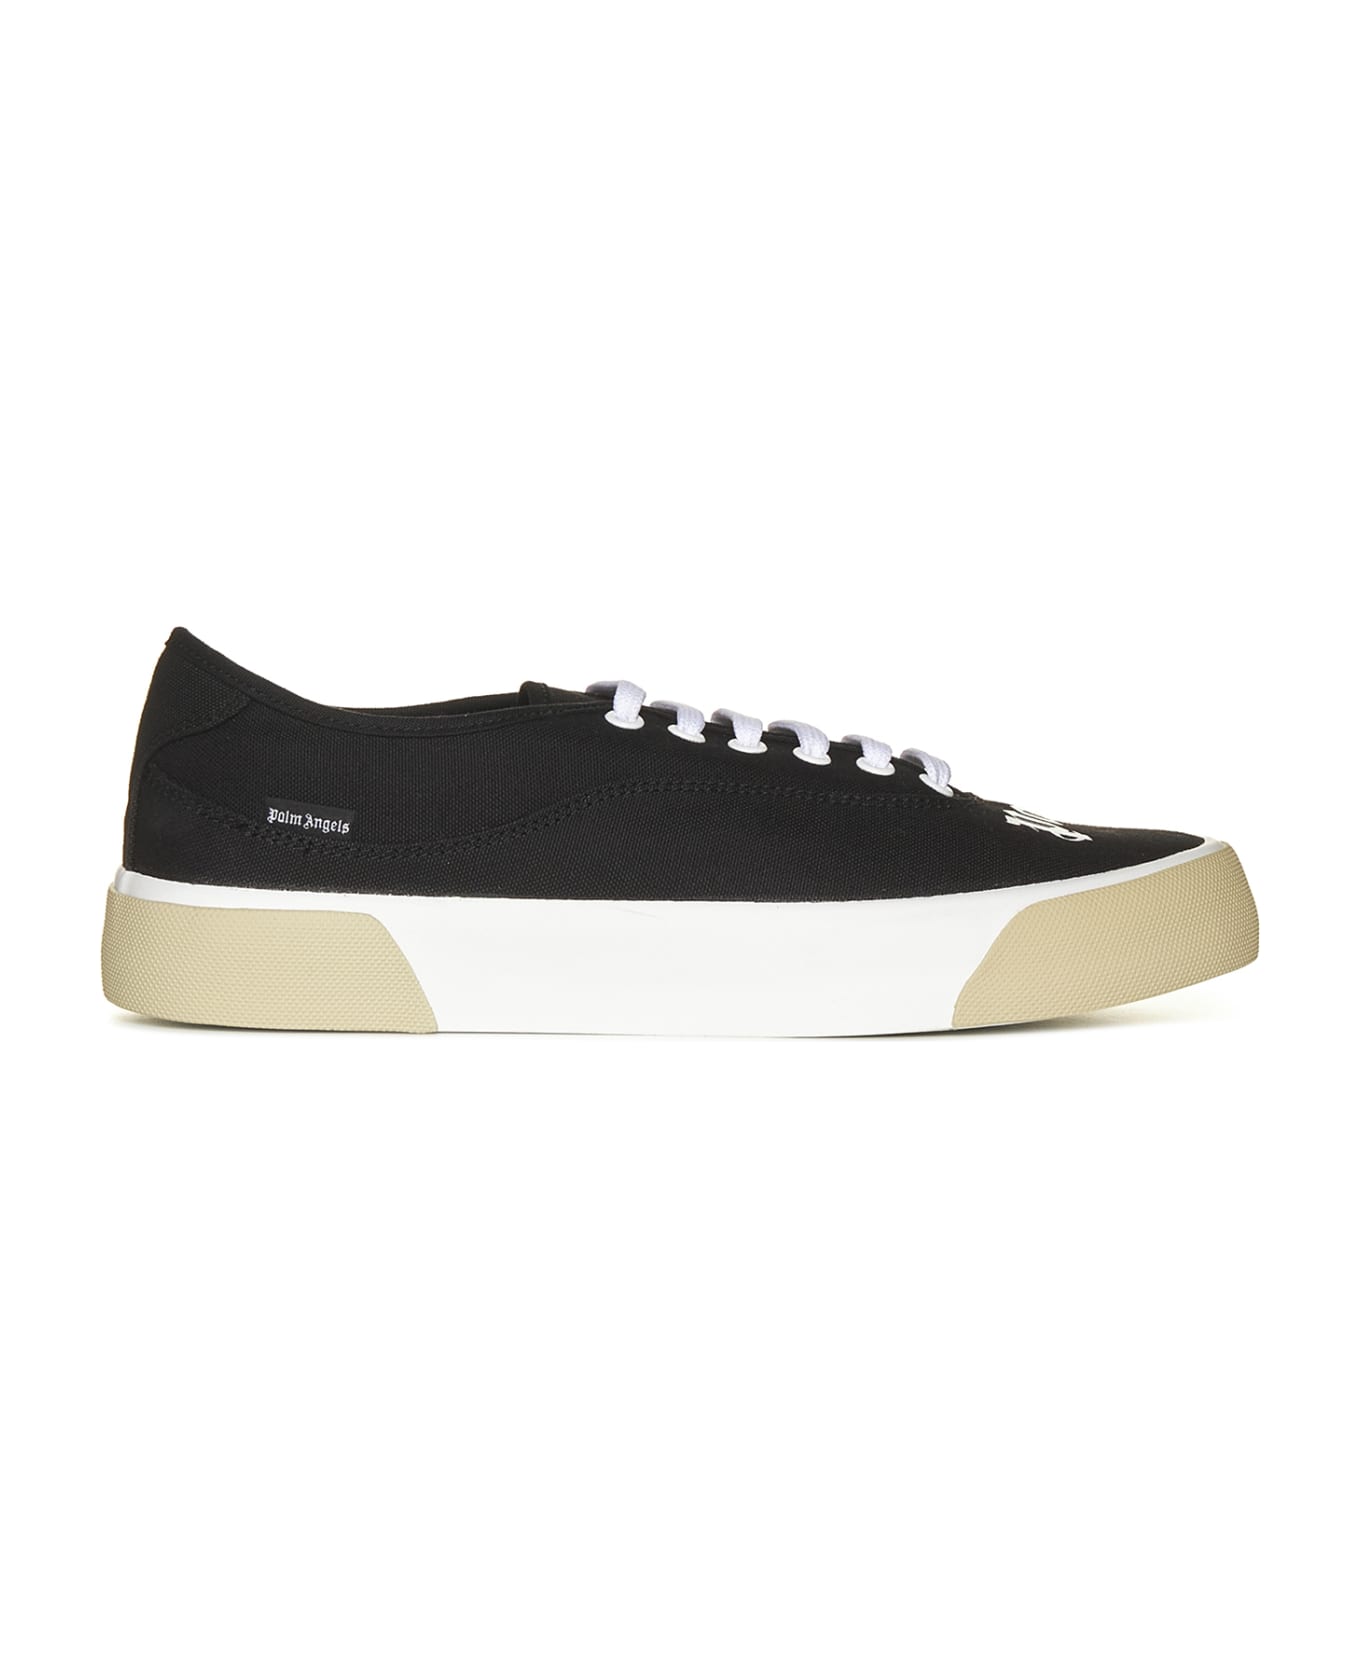 Palm Angels Logo Printed Lace-up Sneakers - Black white